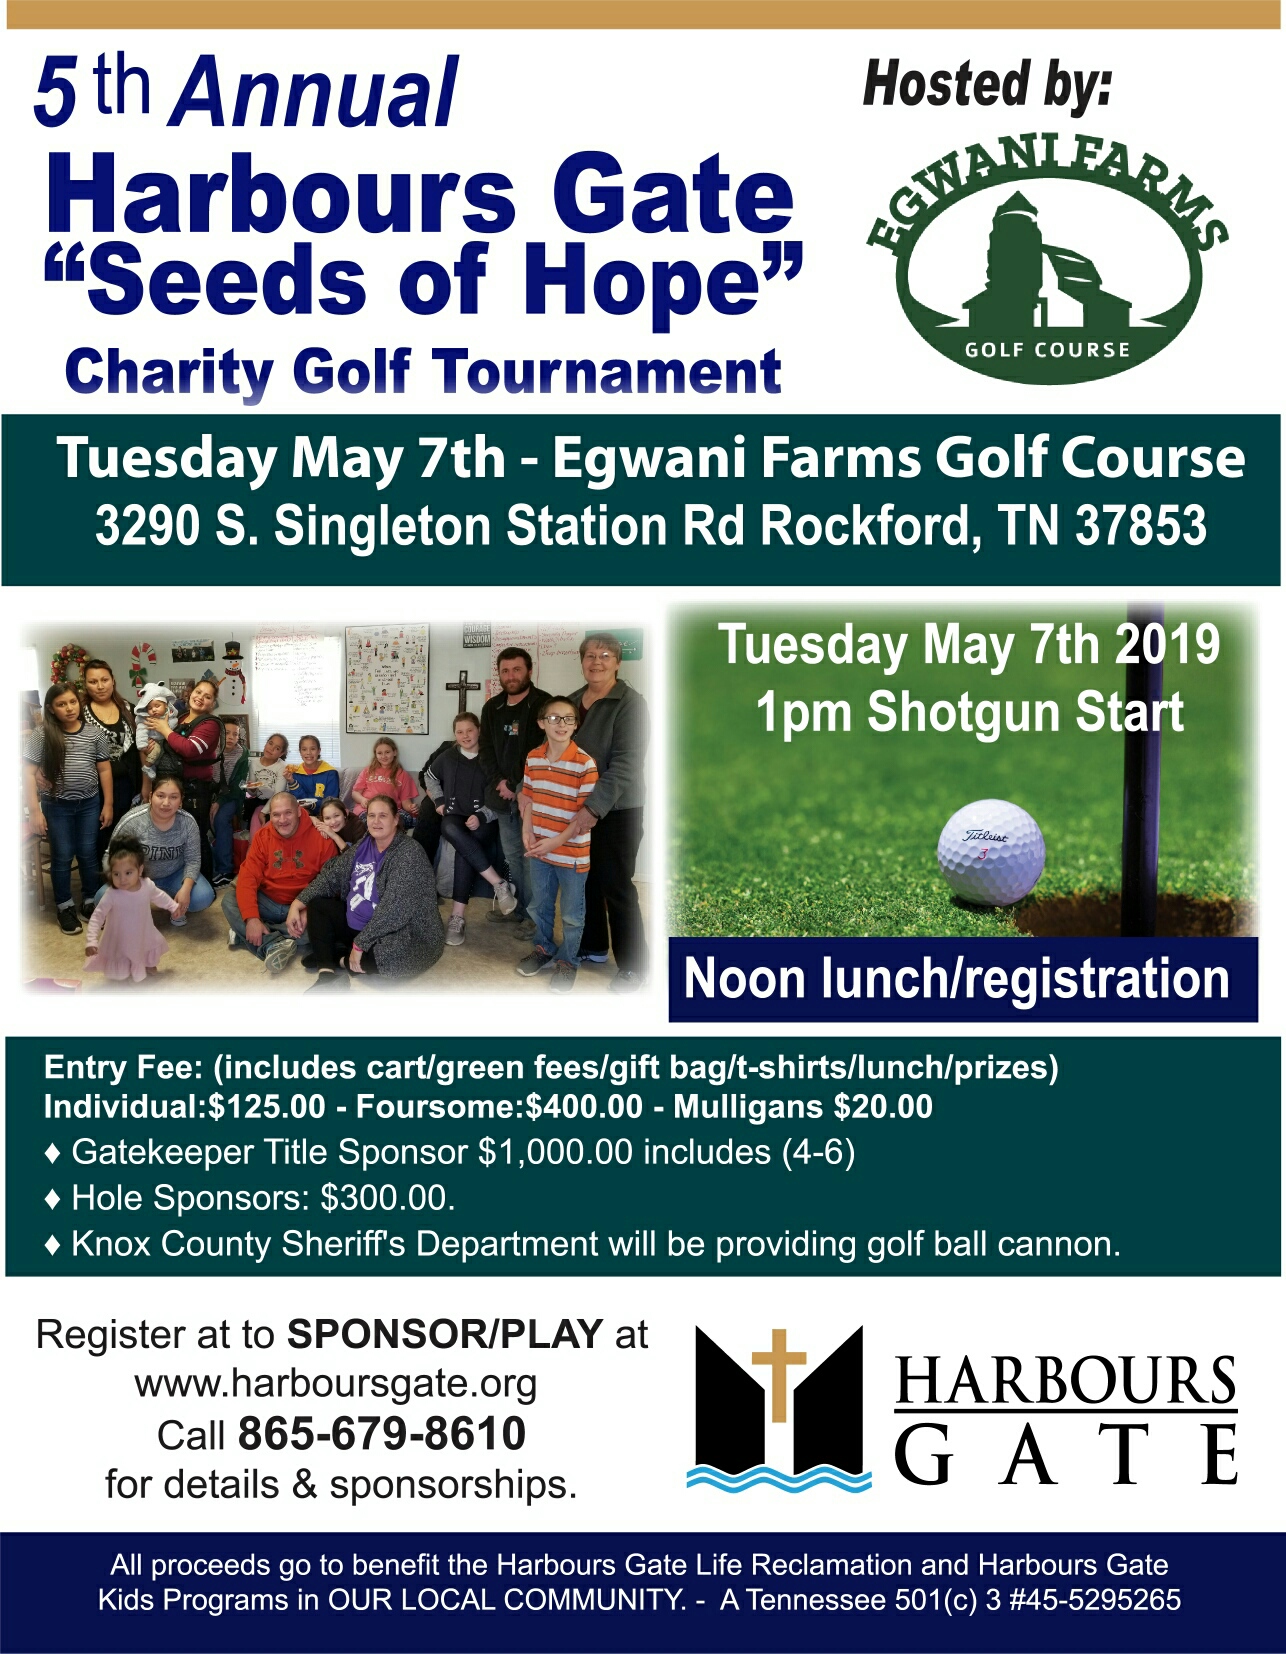 Harbours Gate Seeds of Hope Charity Golf Tournament